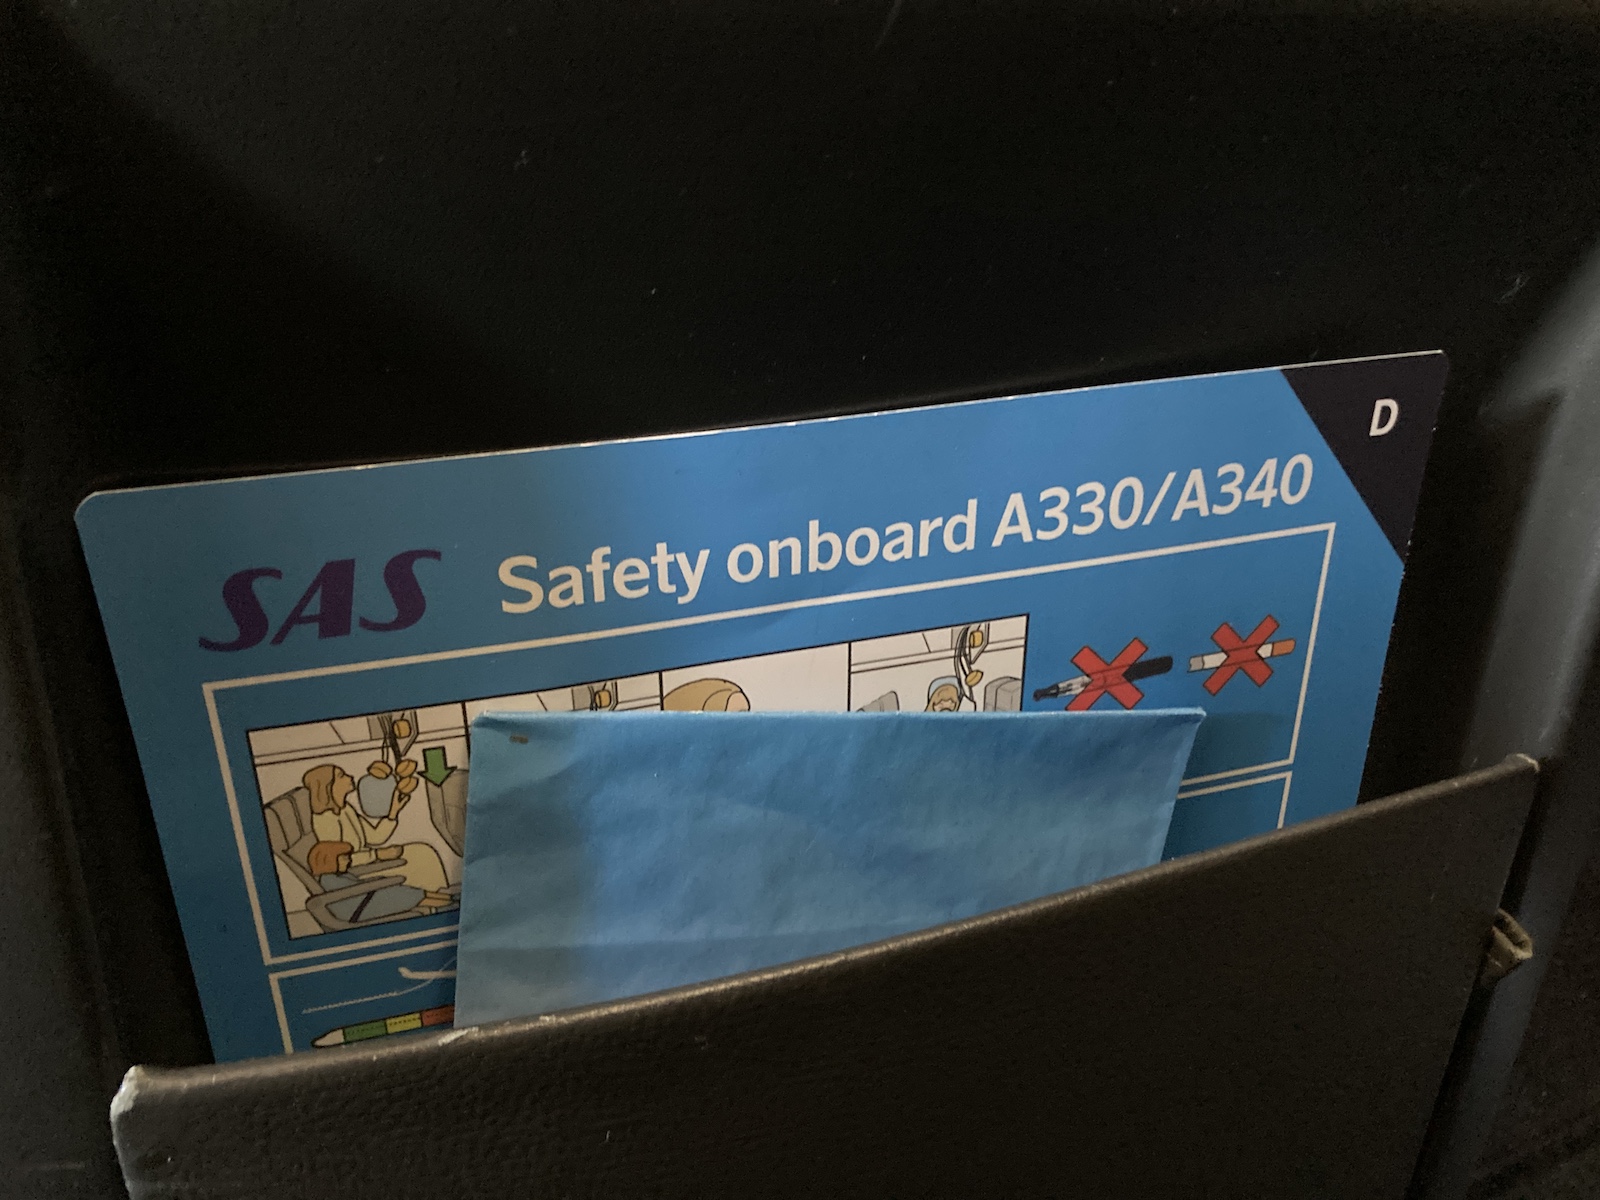 Location of safety information in SAS A330 business class